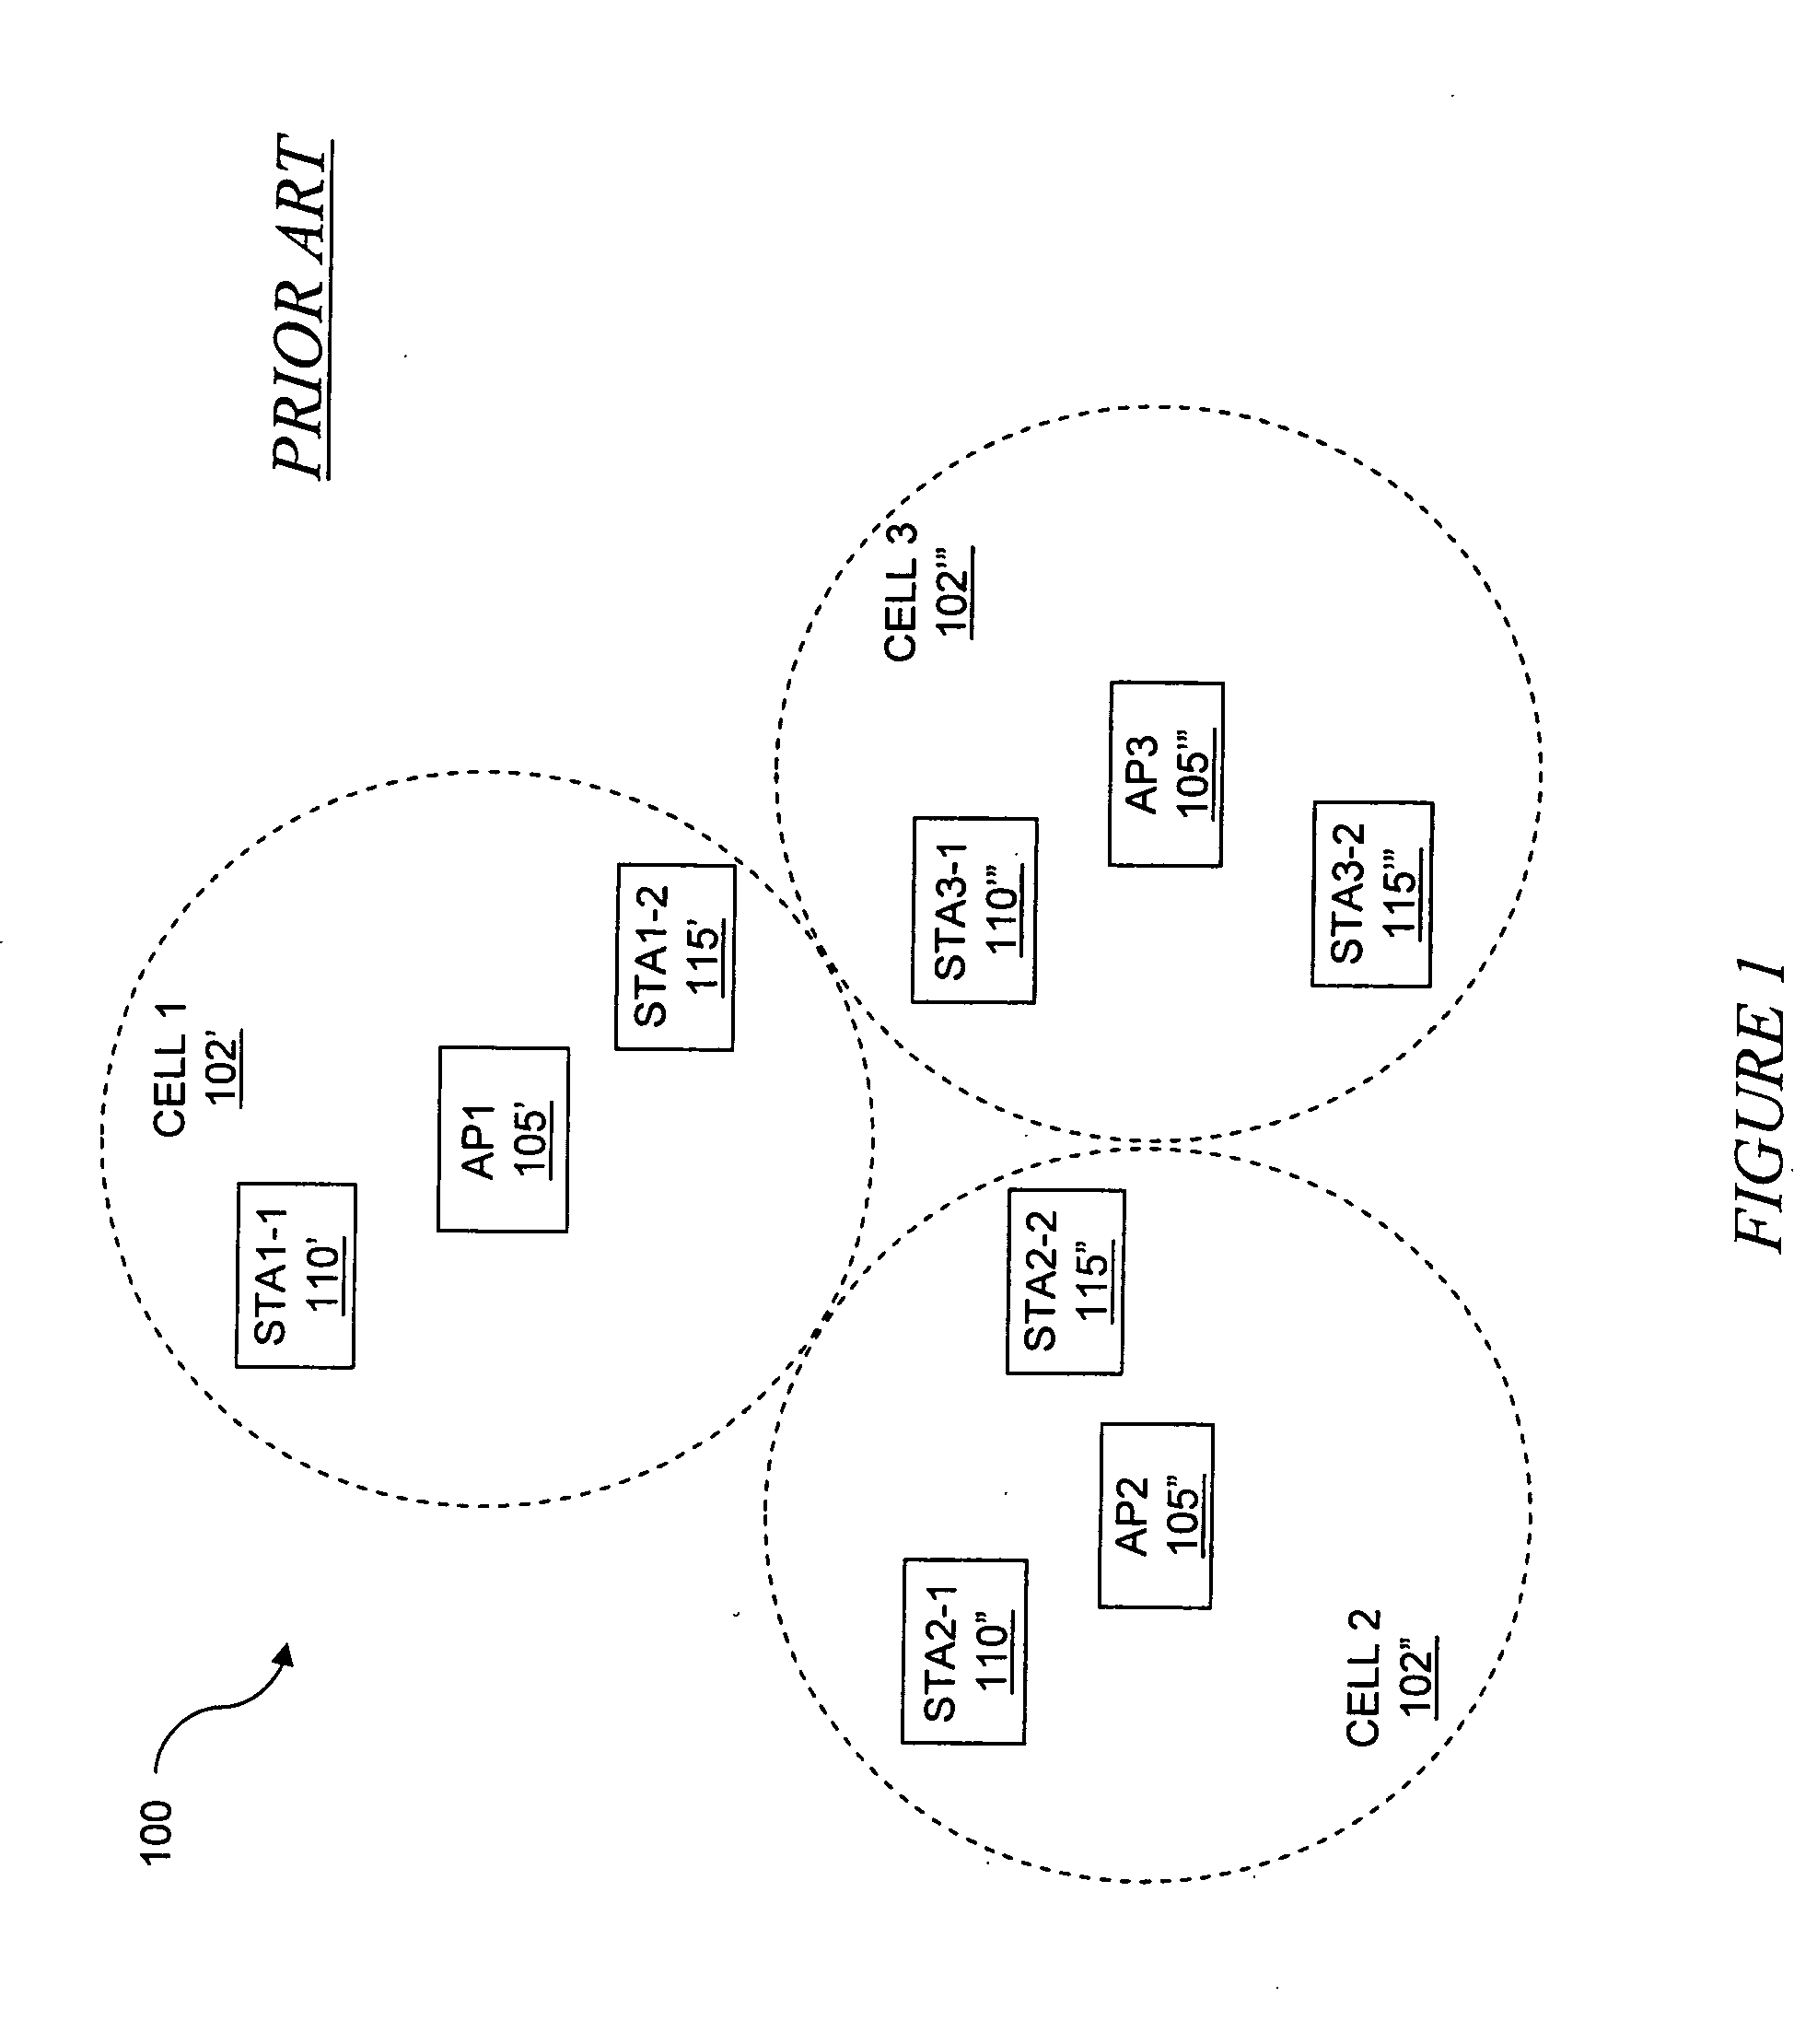 Detecting and eliminating spurious energy in communications systems via multi-channel processing